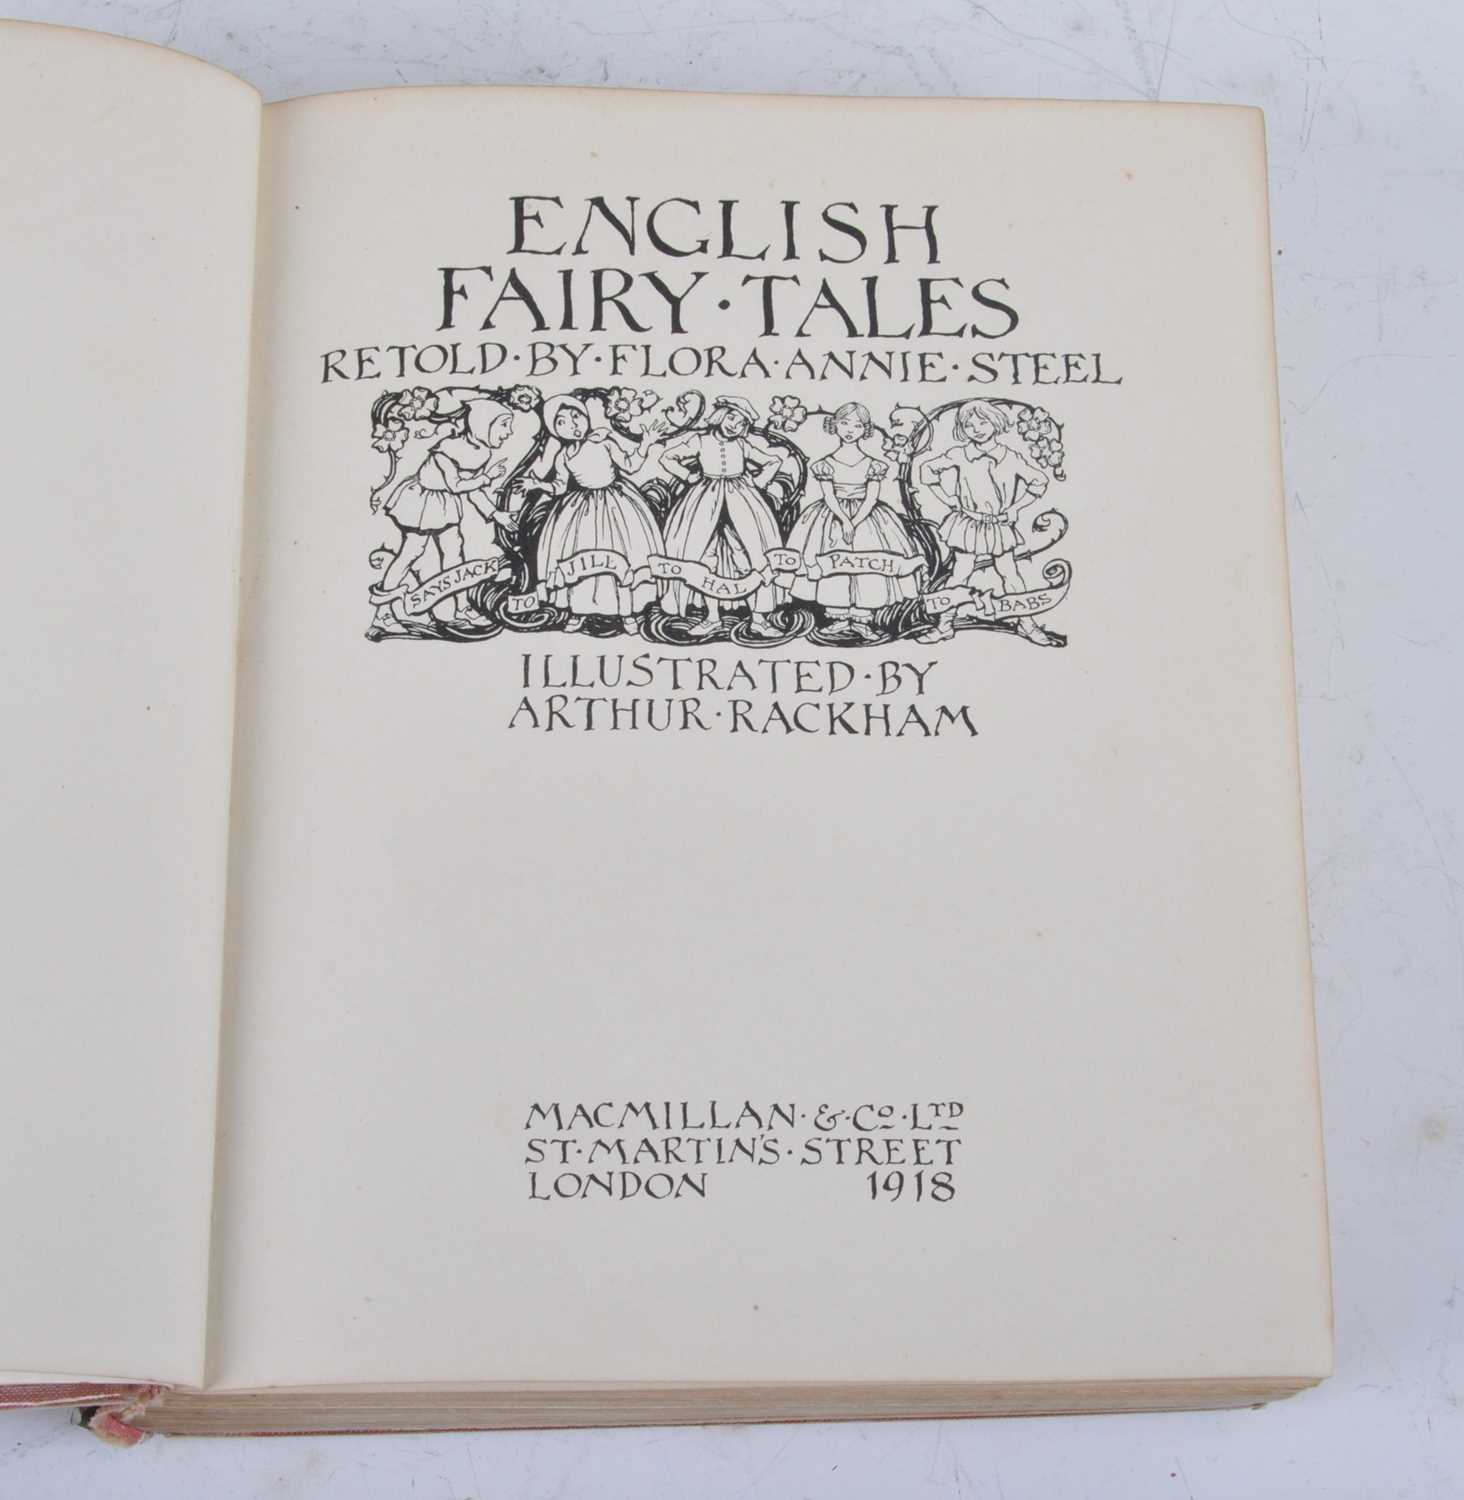 English Fairy Tales, Retold By Flora Annie Steel, Illustrated By Arthur Rackham, Macmillan & Co. - Image 4 of 6